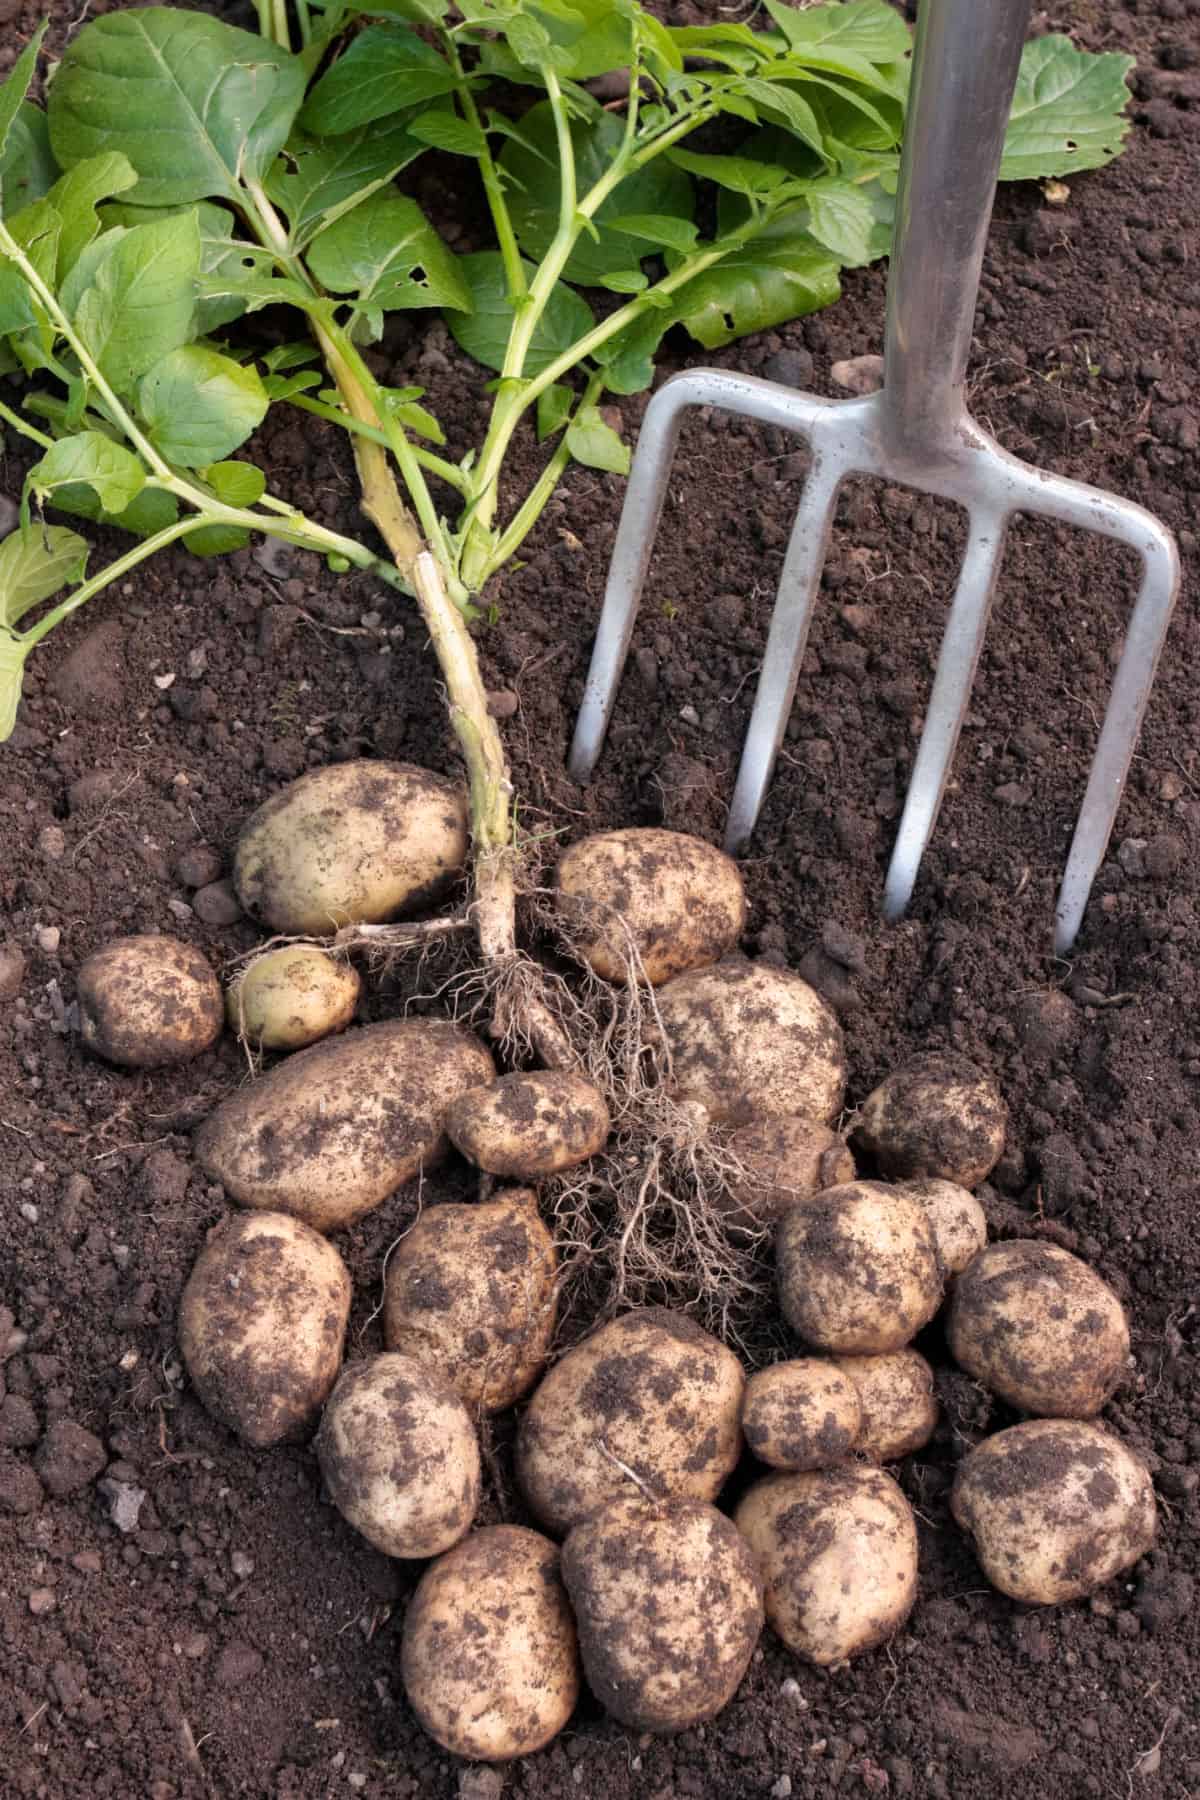 a pitchfork in the dirt near a pile of freshly harvested potatoes